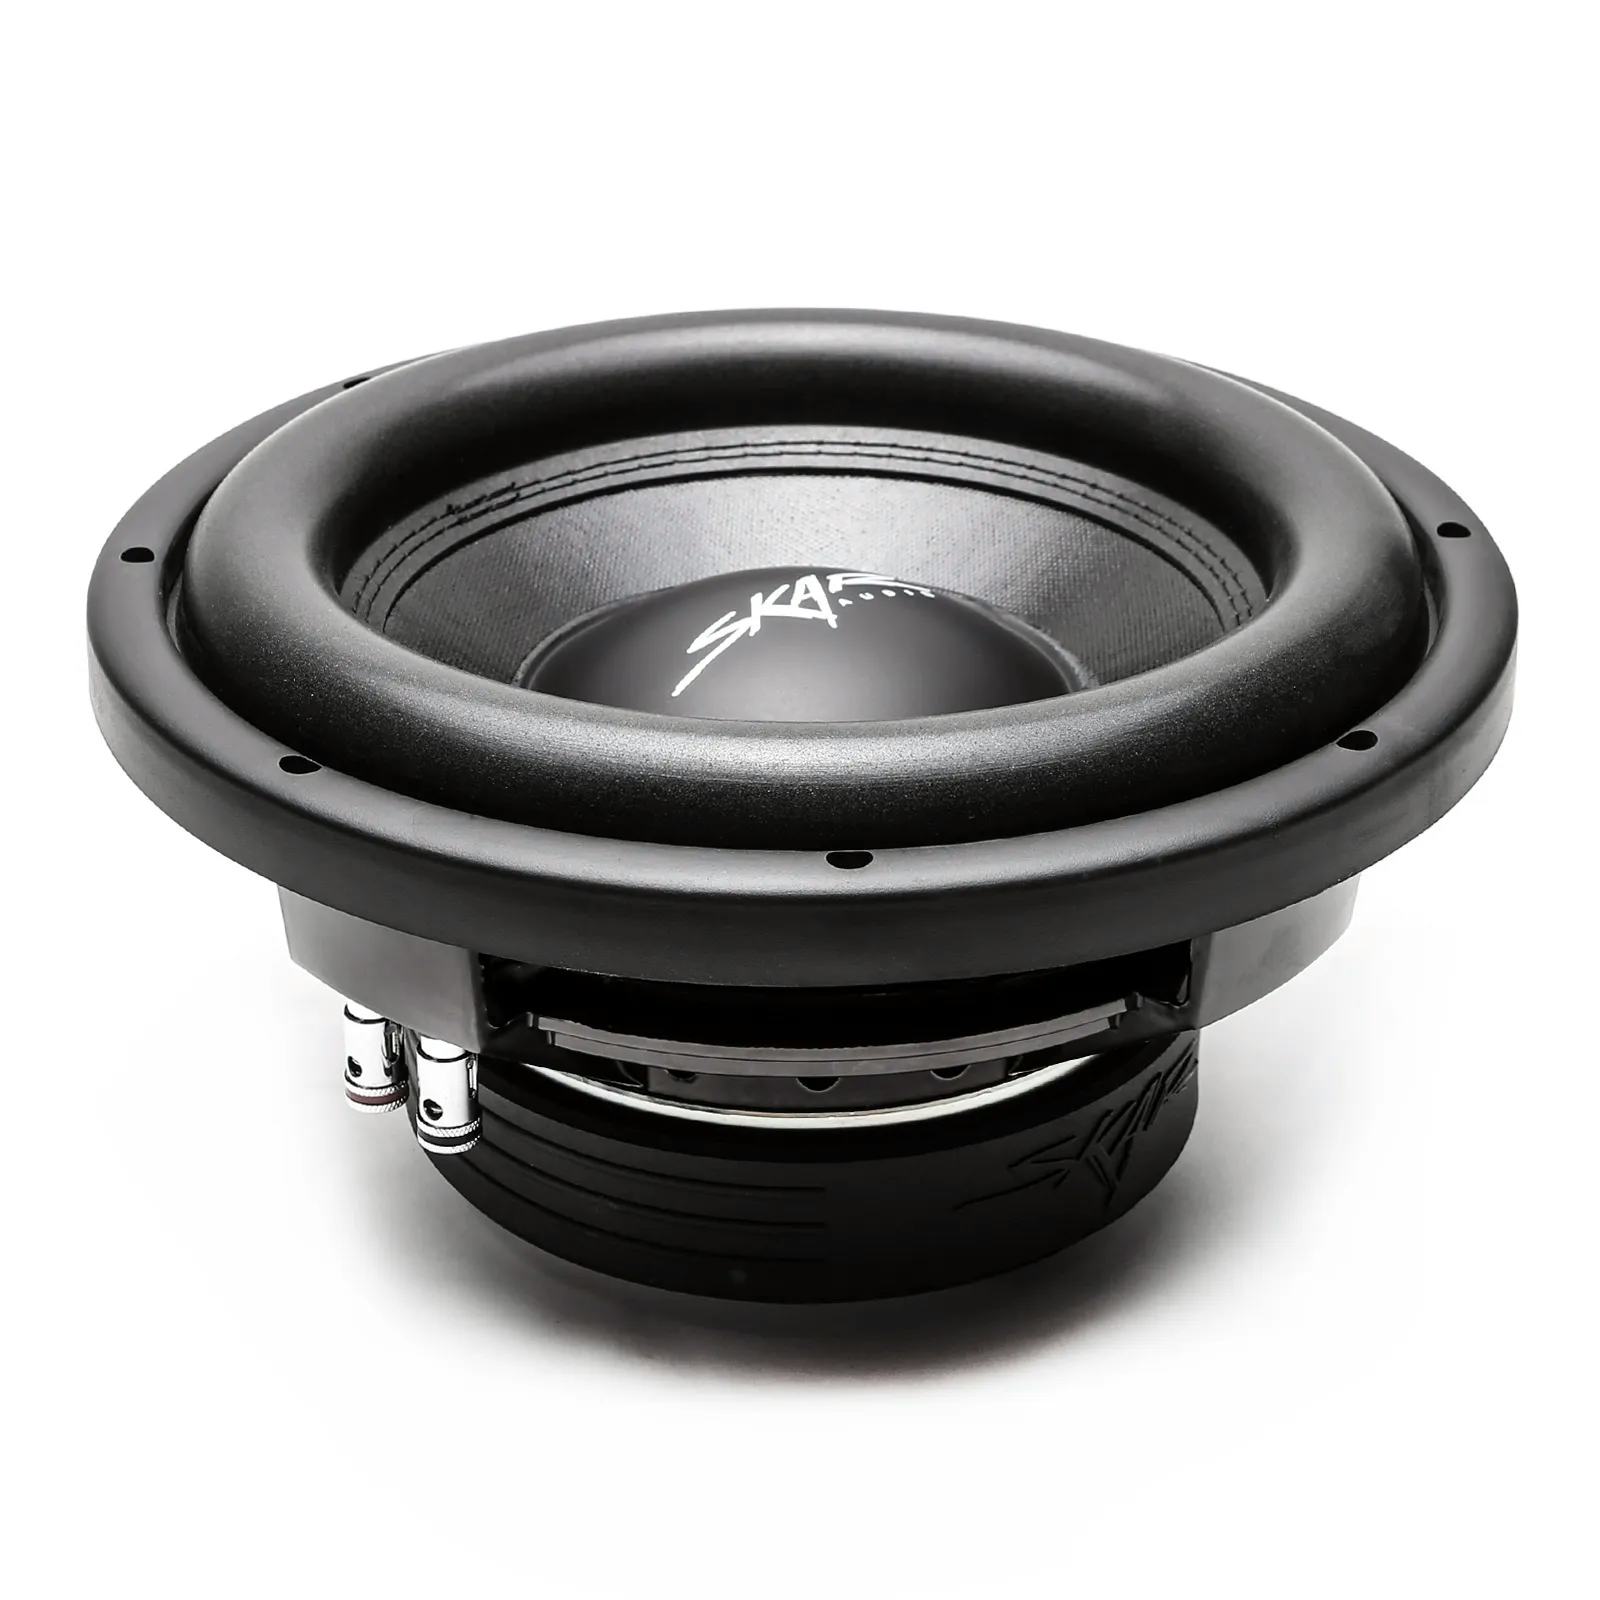 Shallow-Mount Subwoofers for a Large Bass in a Small Car